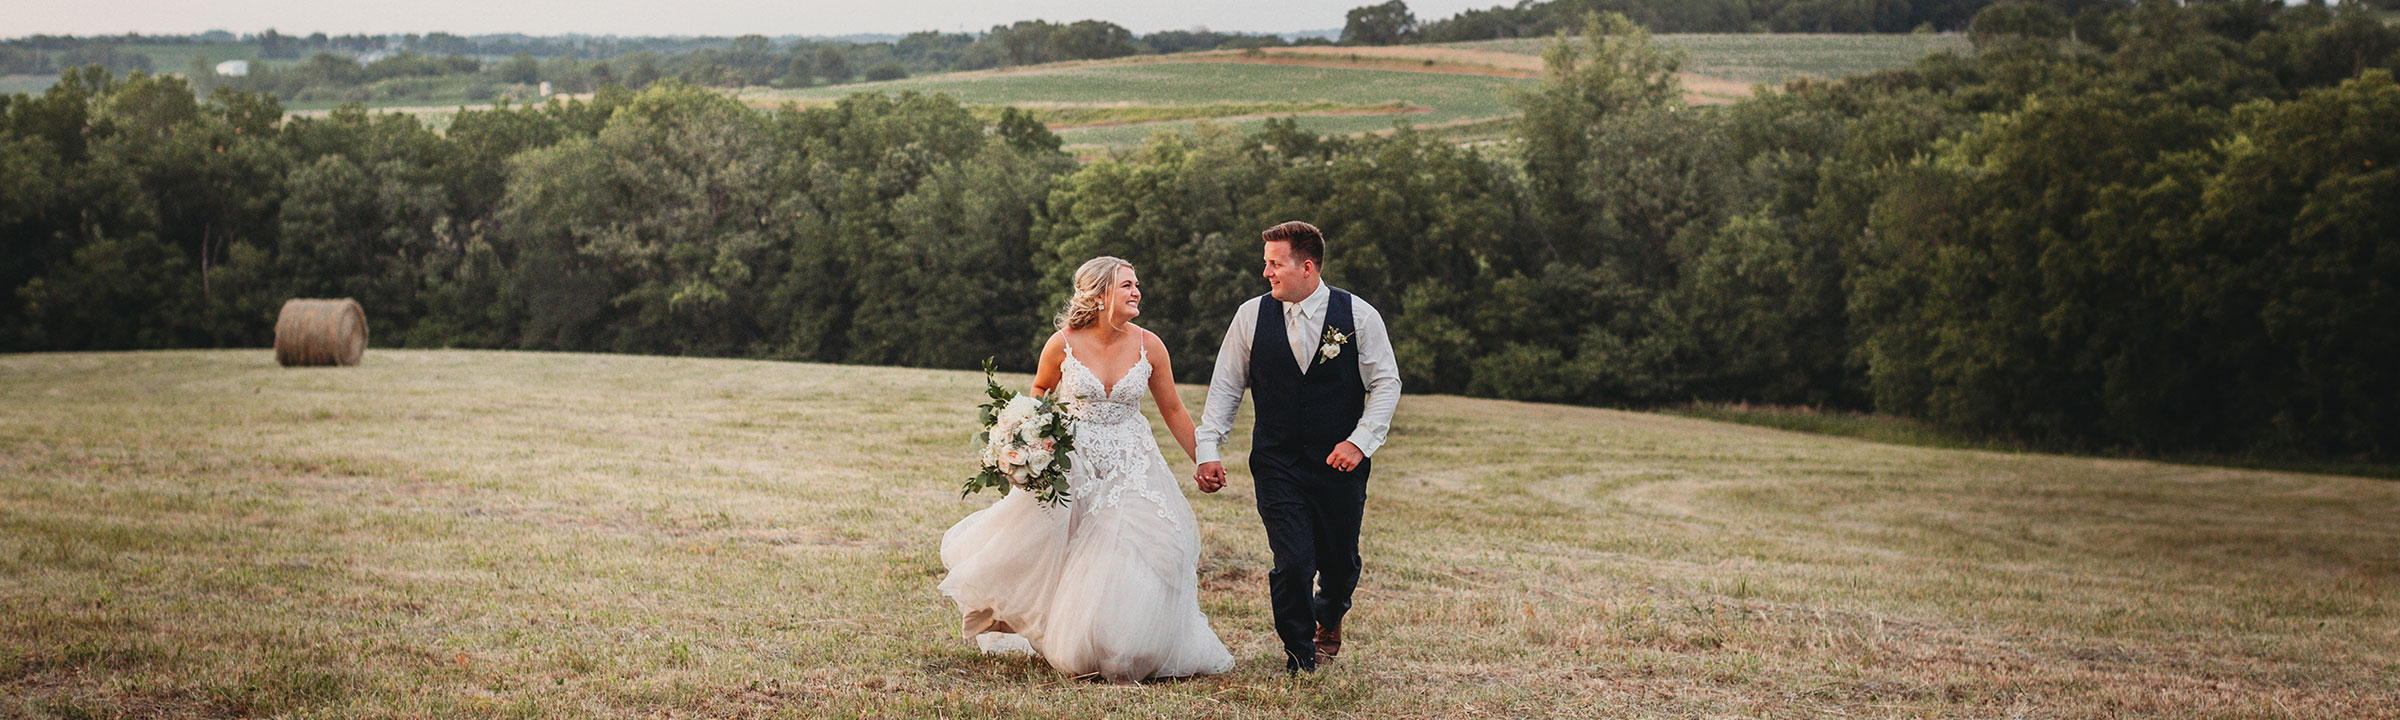 Bride and groom running in the field holding hands